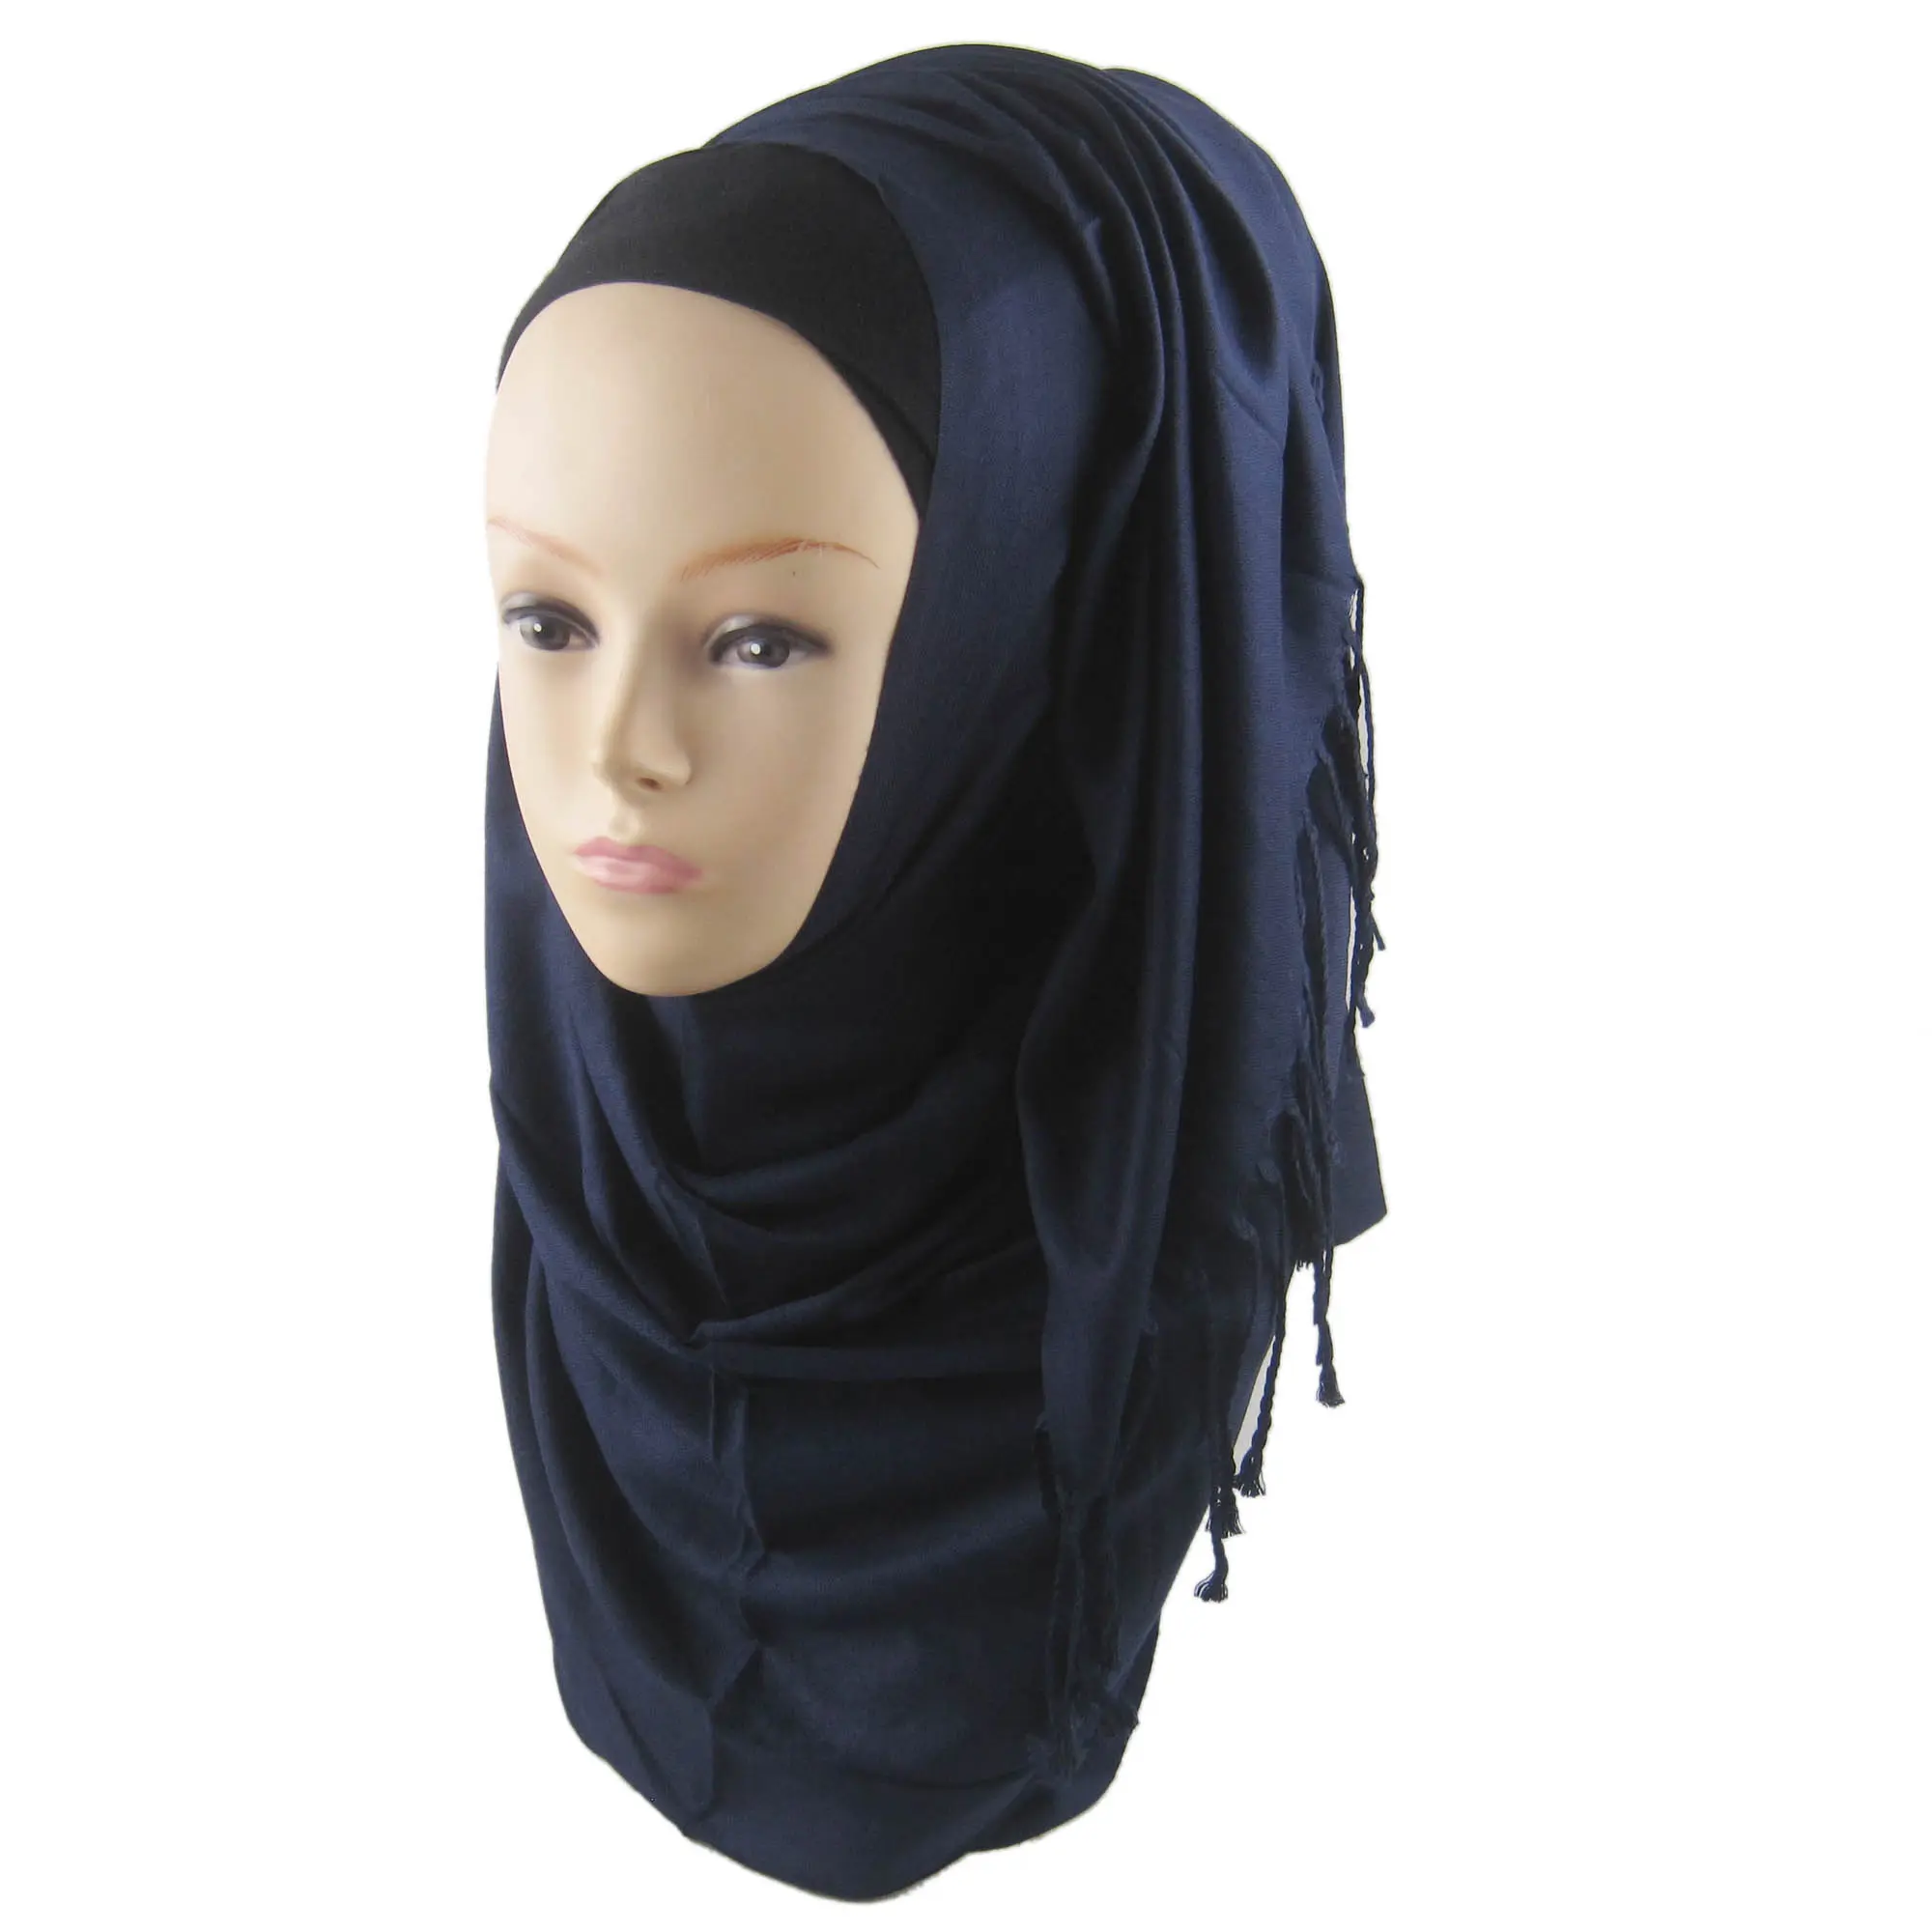 2021 extra long hijab fancy custom winter scarf solid color pleated black scarf for women cotton fabric shipon hijab